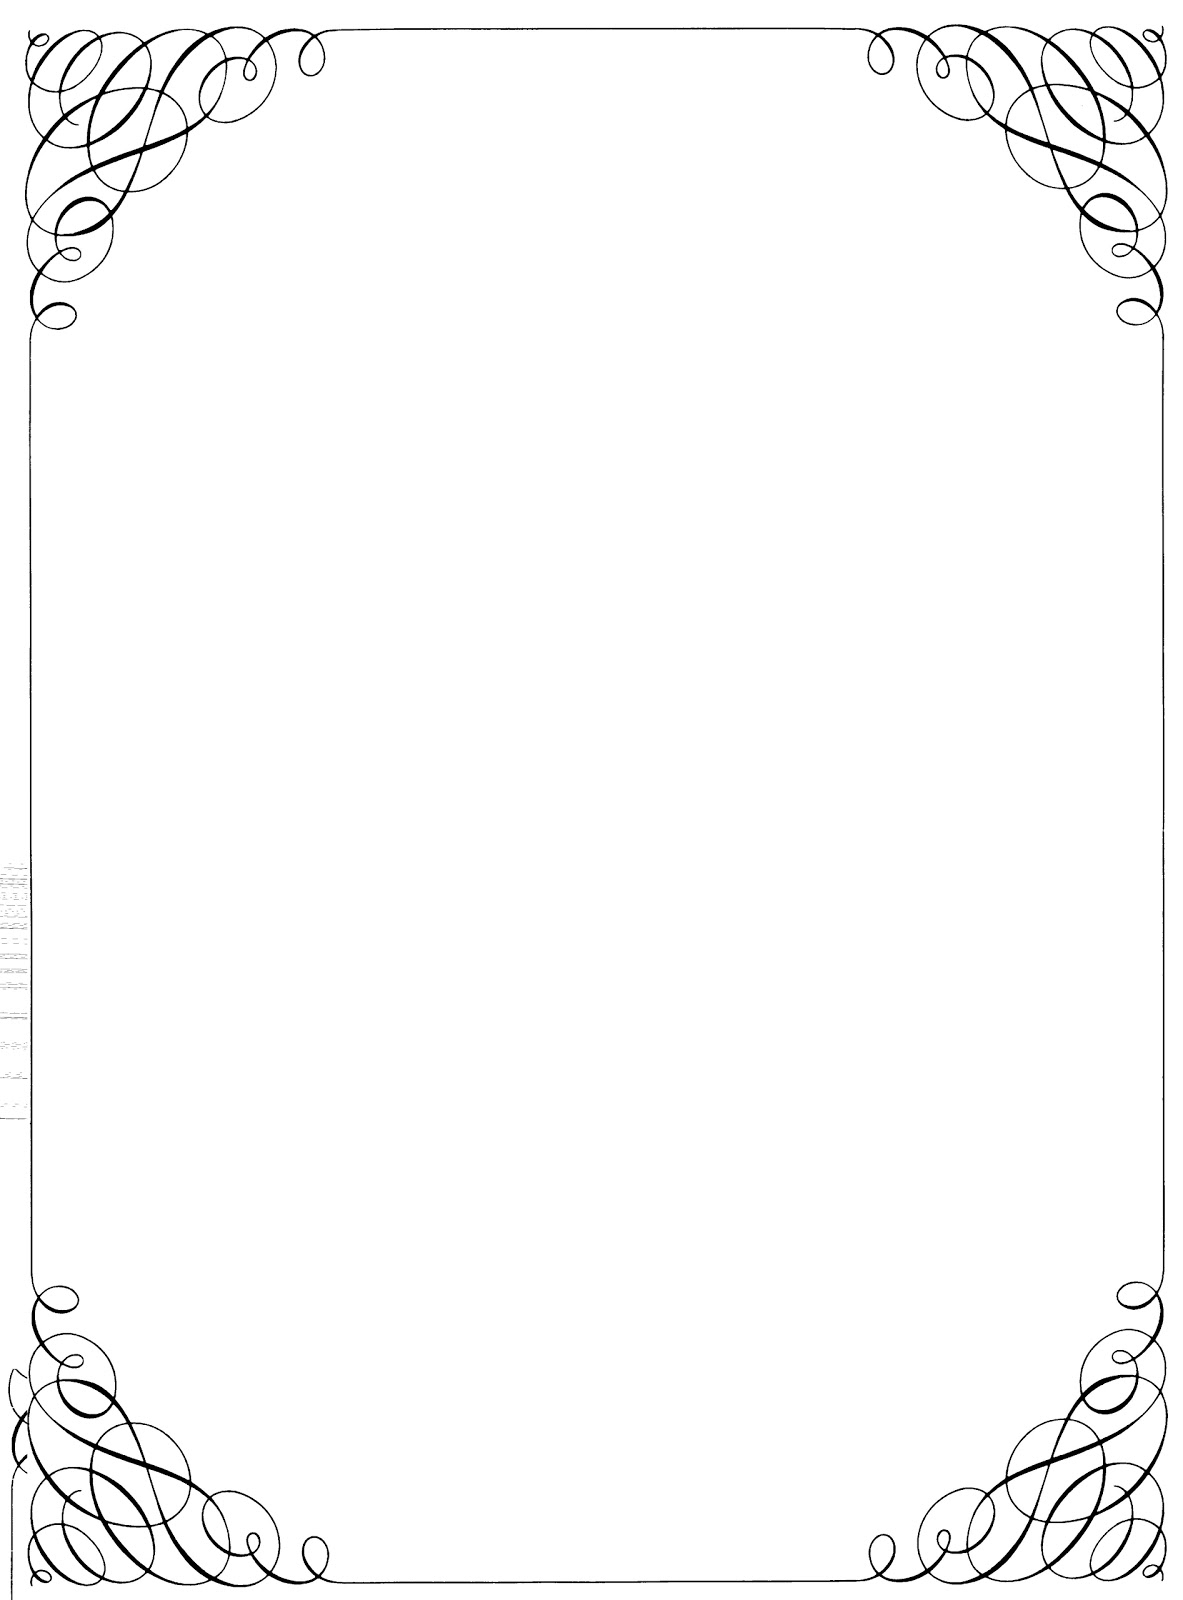 clip art borders and frames for word - photo #18